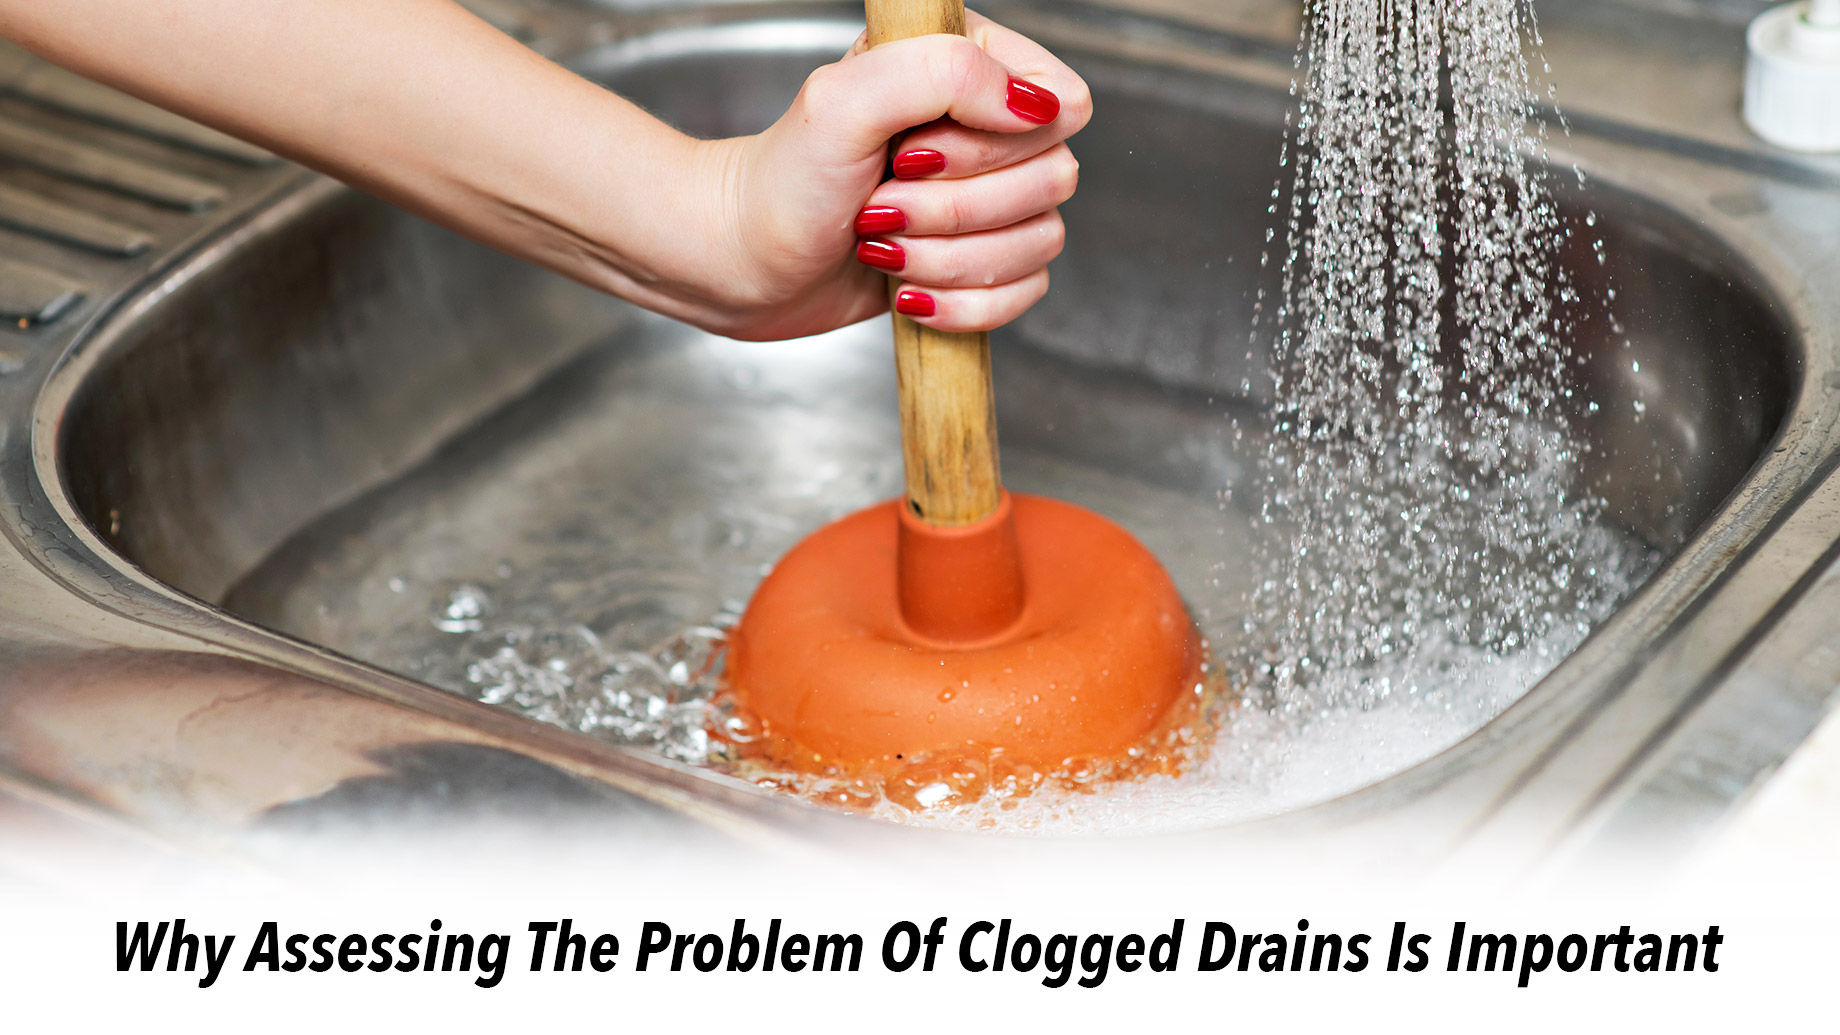 Why Assessing The Problem Of Clogged Drains Is Important